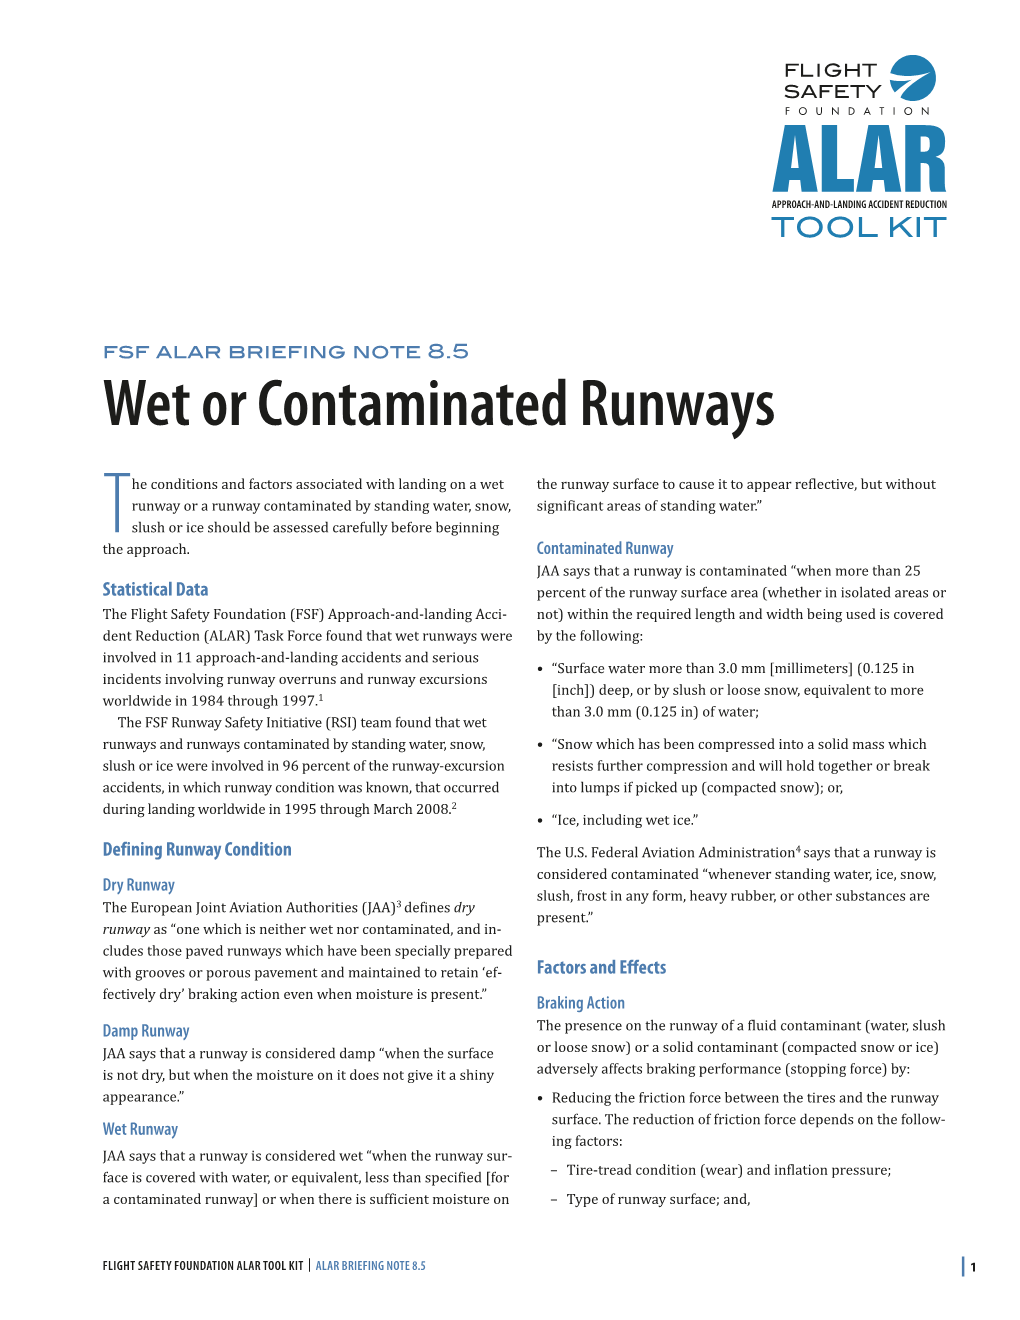 FSF ALAR Briefing Note 8.5: Wet Or Contaminated Runways